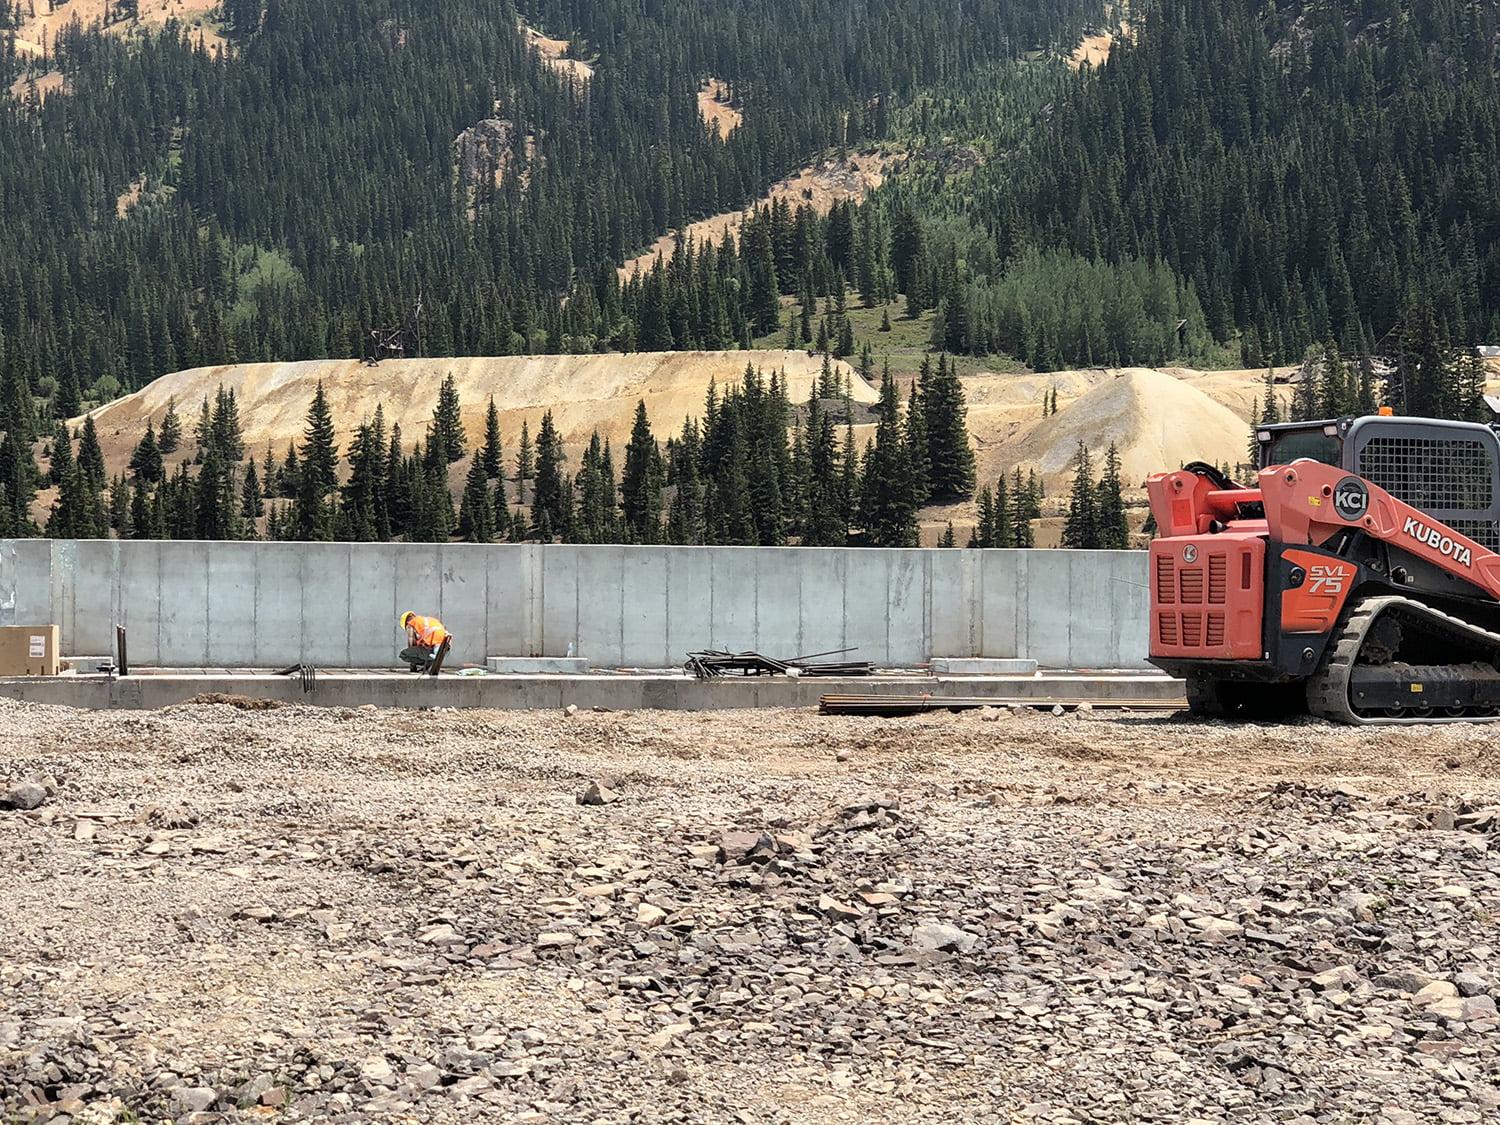 Kuboske Construction and KCI Excavation on job site in Ouray